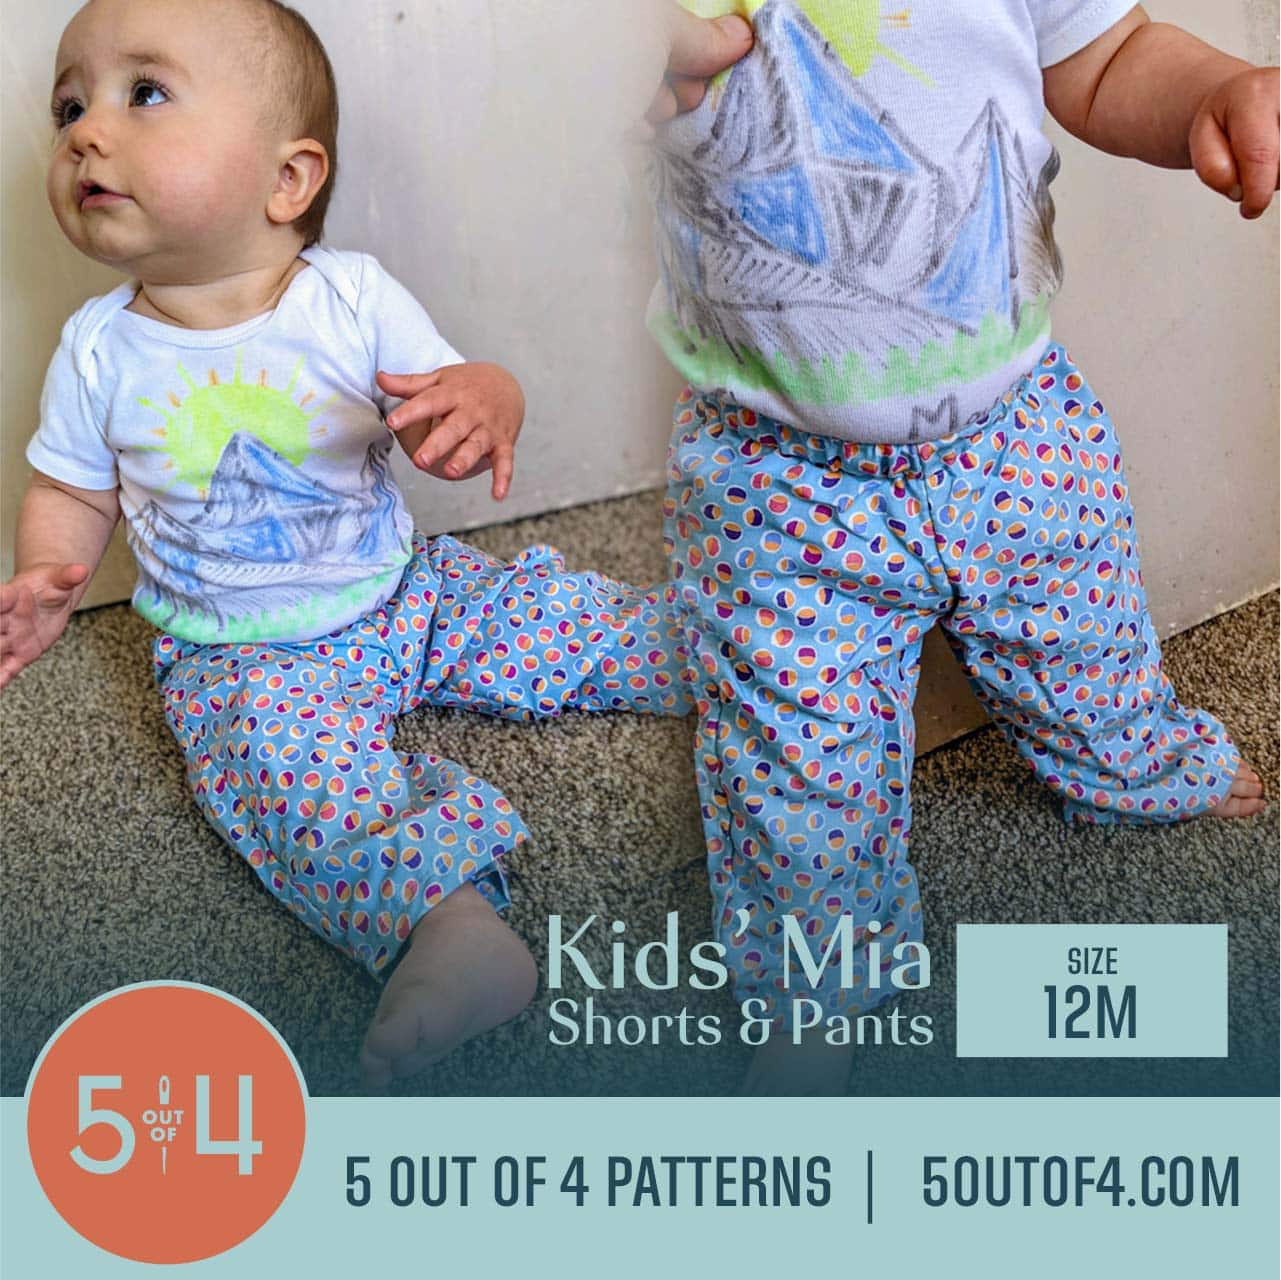 Kids' Mia Shorts and Pants - 5 out of 4 Patterns